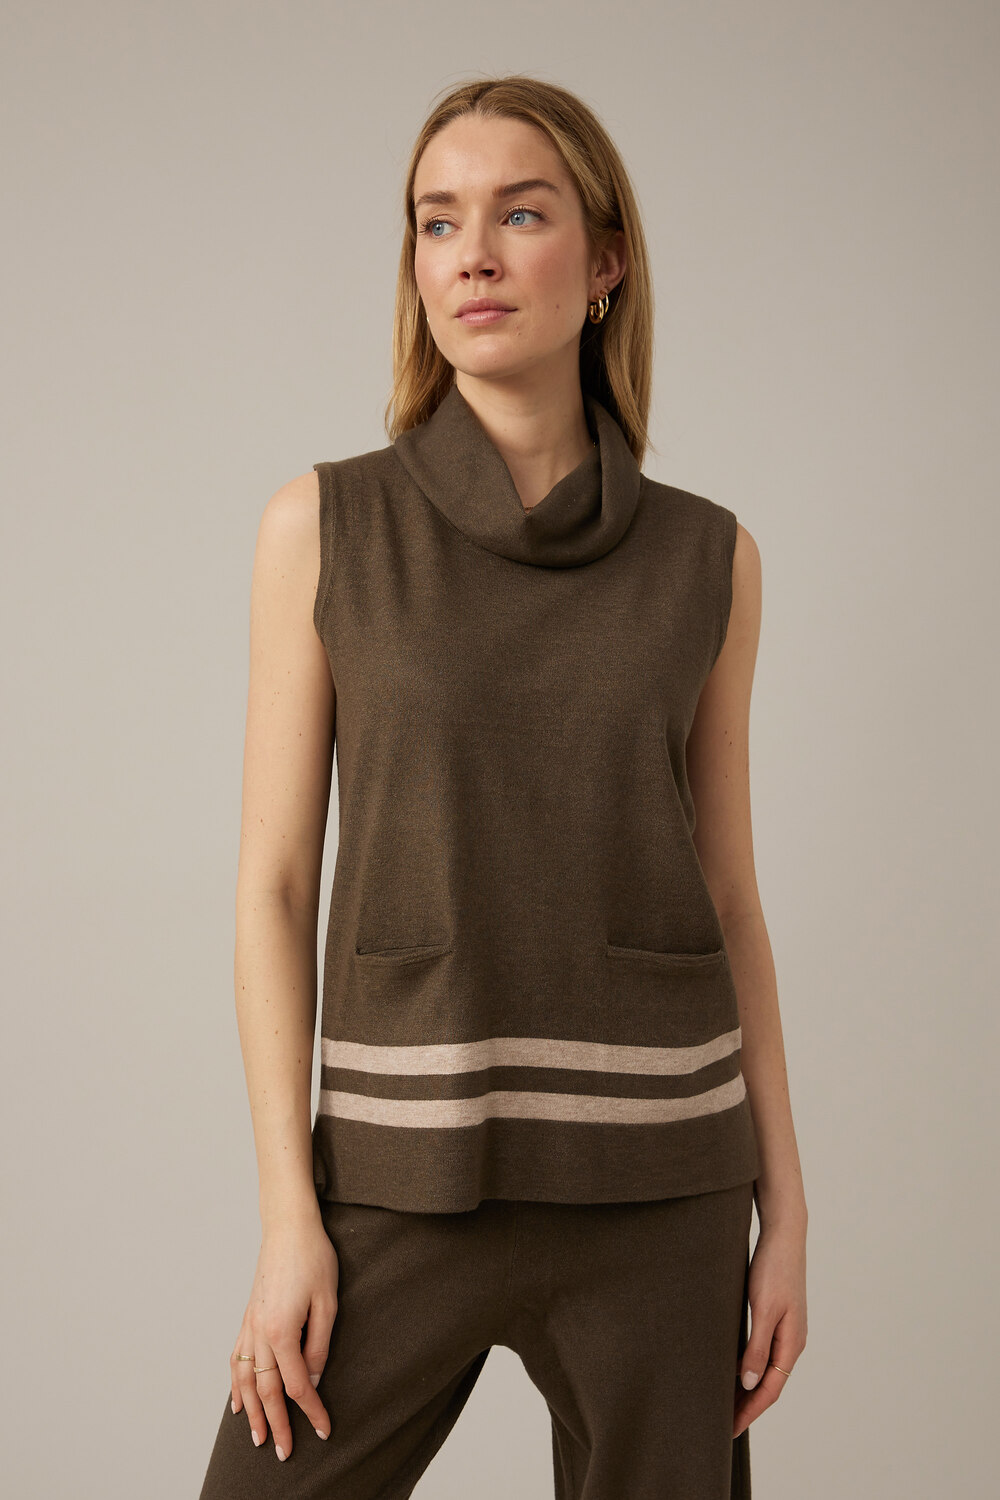 Emproved Sleeveless Top Style A2202. Olive 